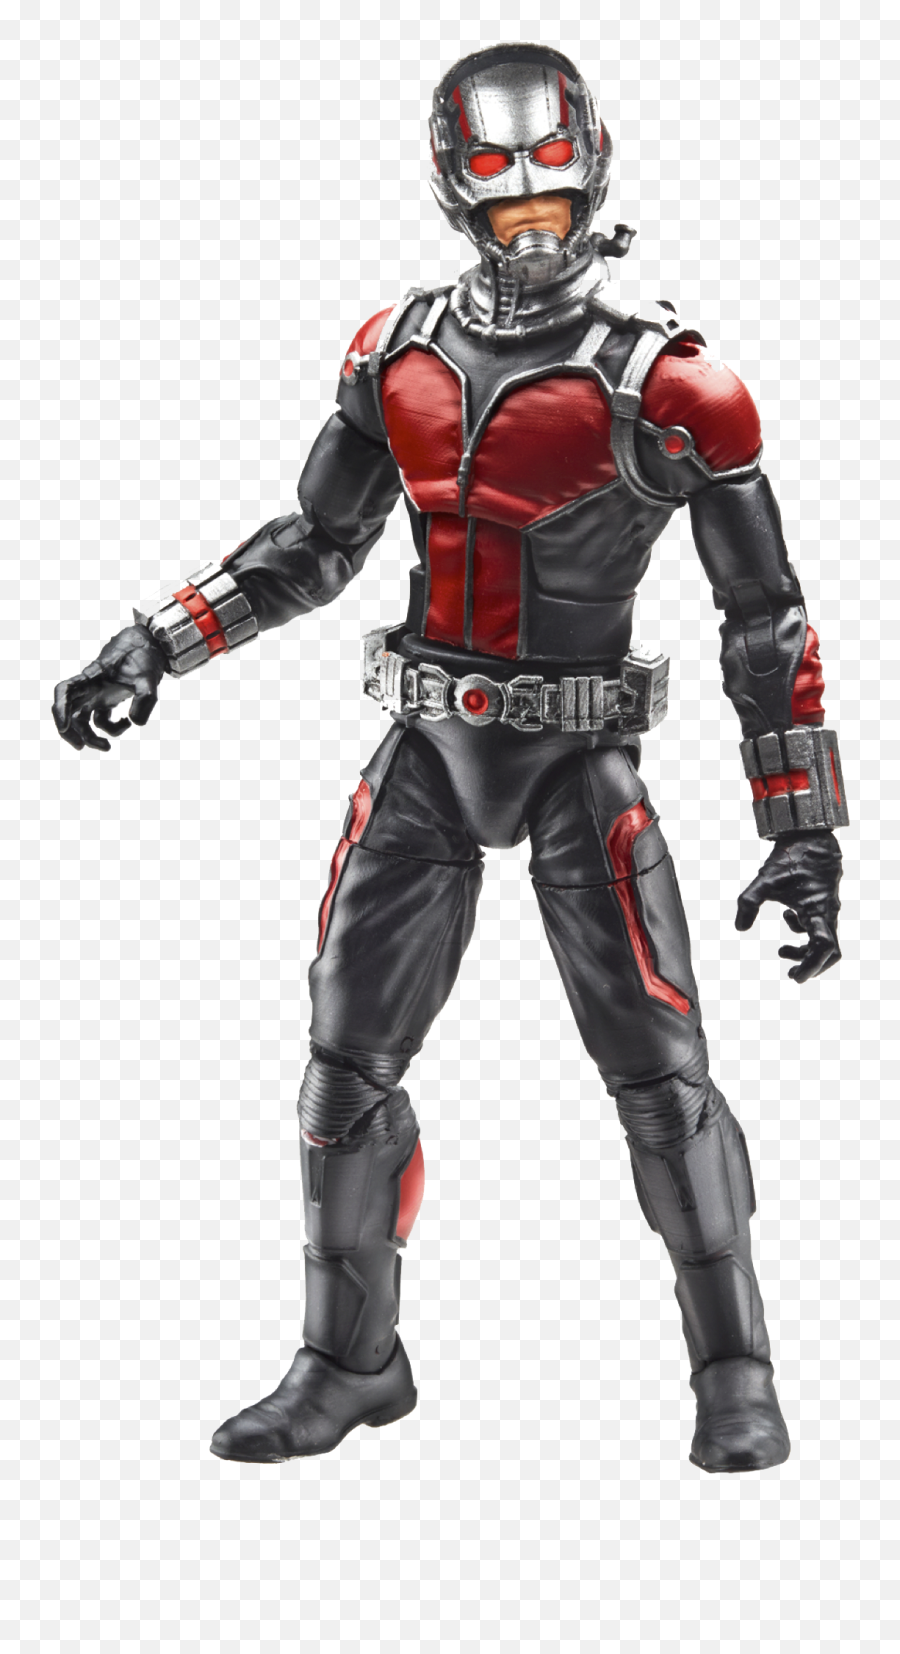 Download Ant - Ant Man Transparent Background Png,Antman Png